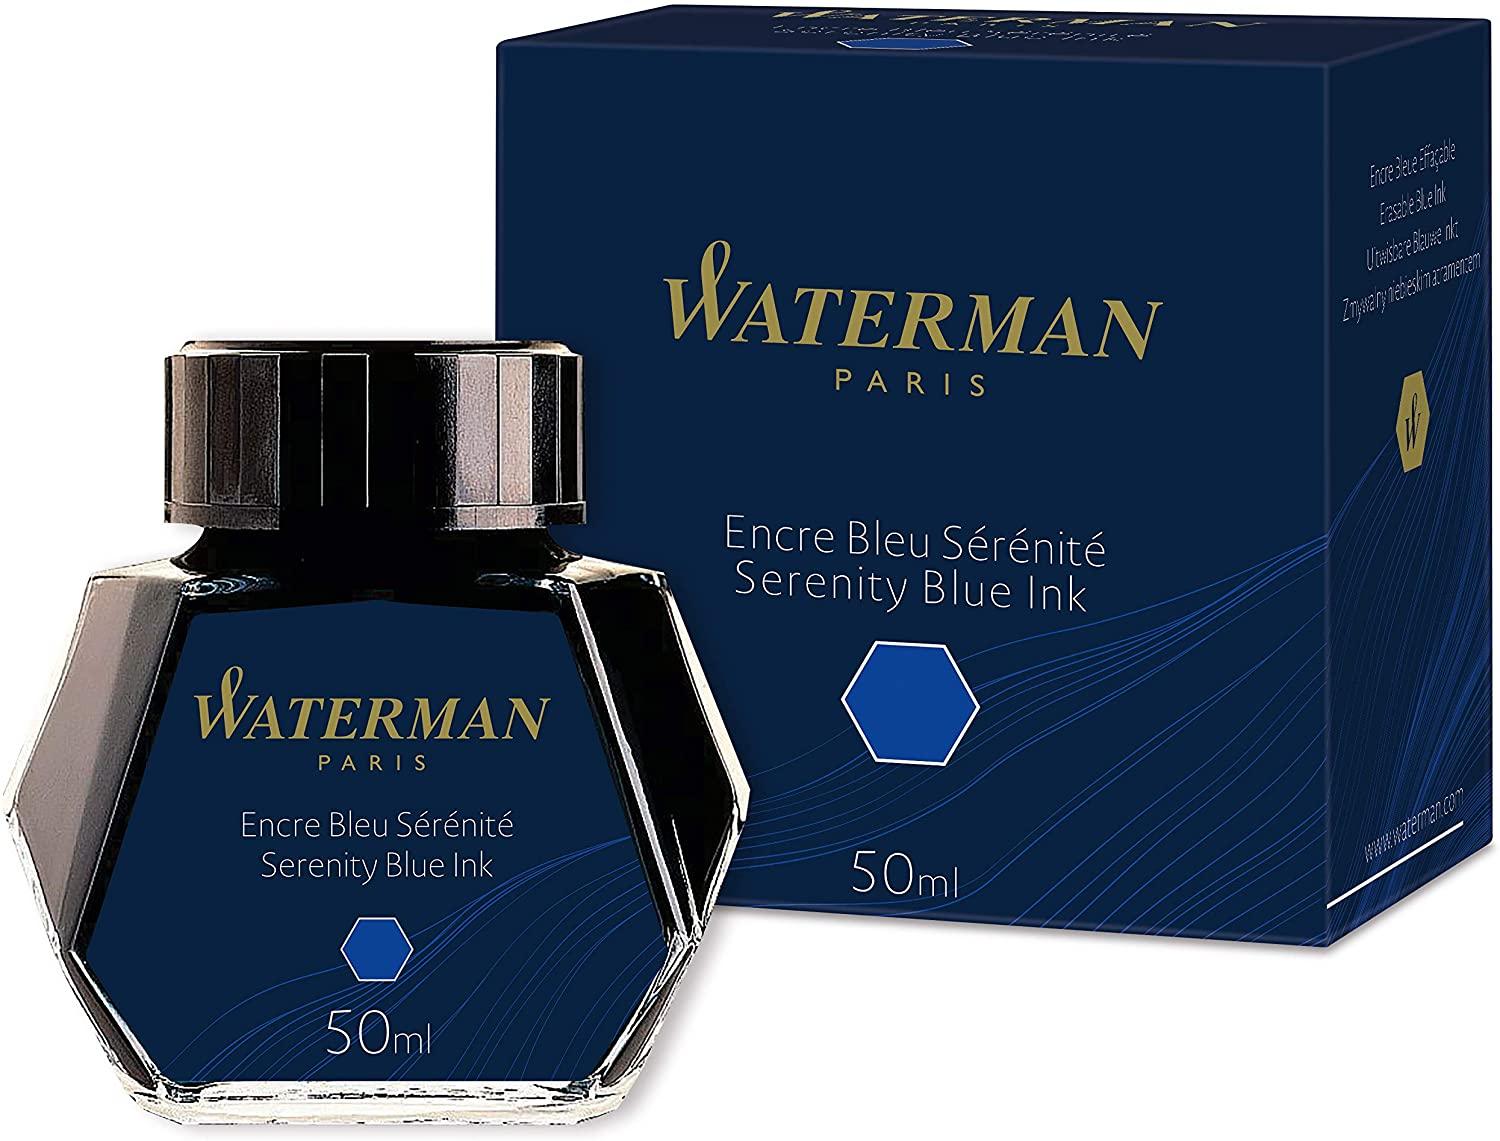 Waterman Fountain Pen Ink for $5.69 Shipped